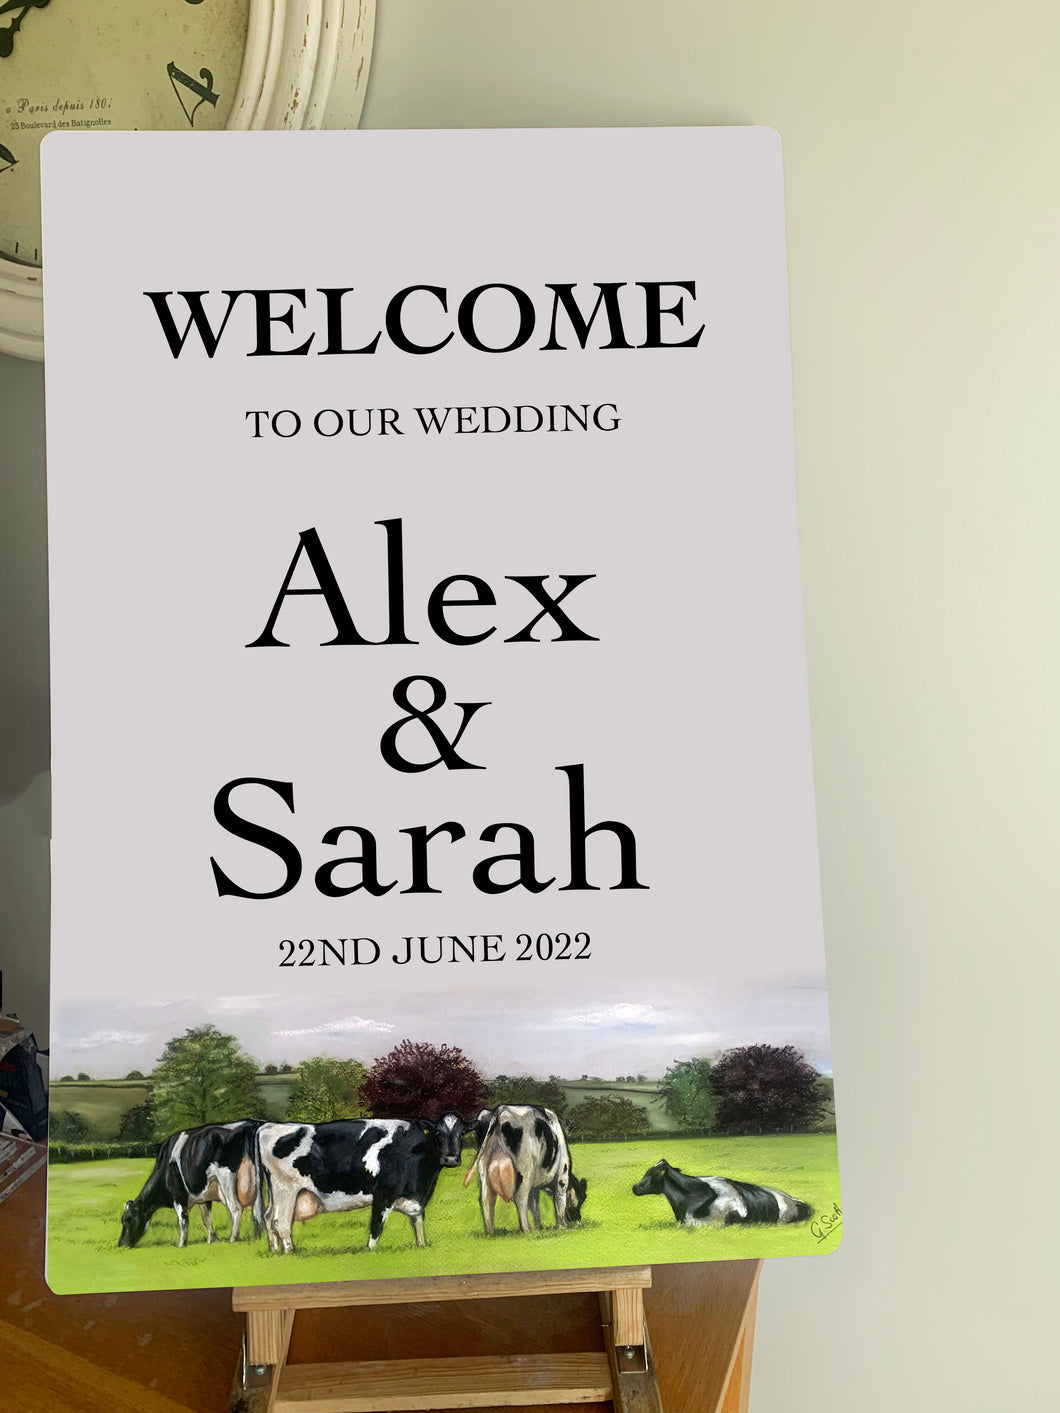 Friesian Cows Farming Themed Wedding Welcome Sign - Various Breeds Available